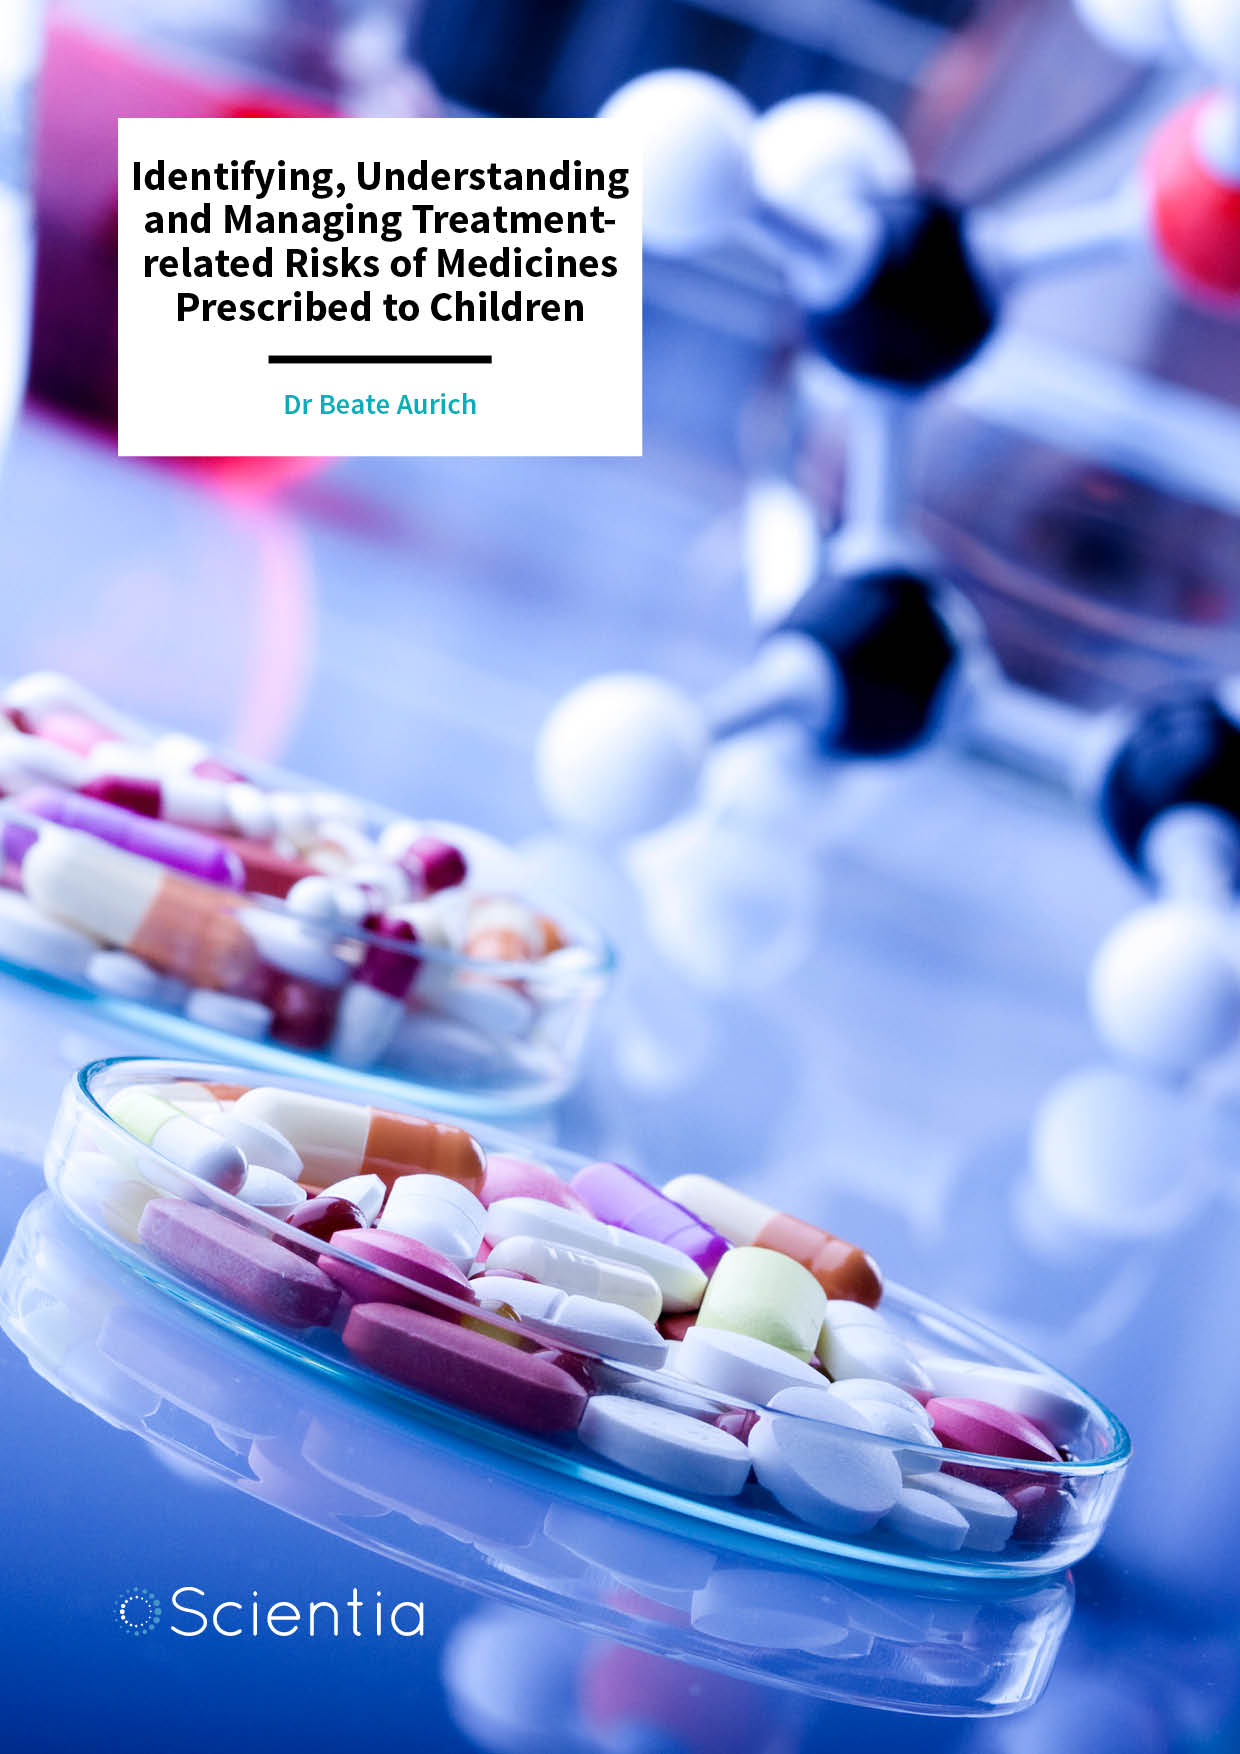 Dr Beate Aurich | Identifying, Understanding and Managing Treatment-related Risks of Medicines Prescribed to Children